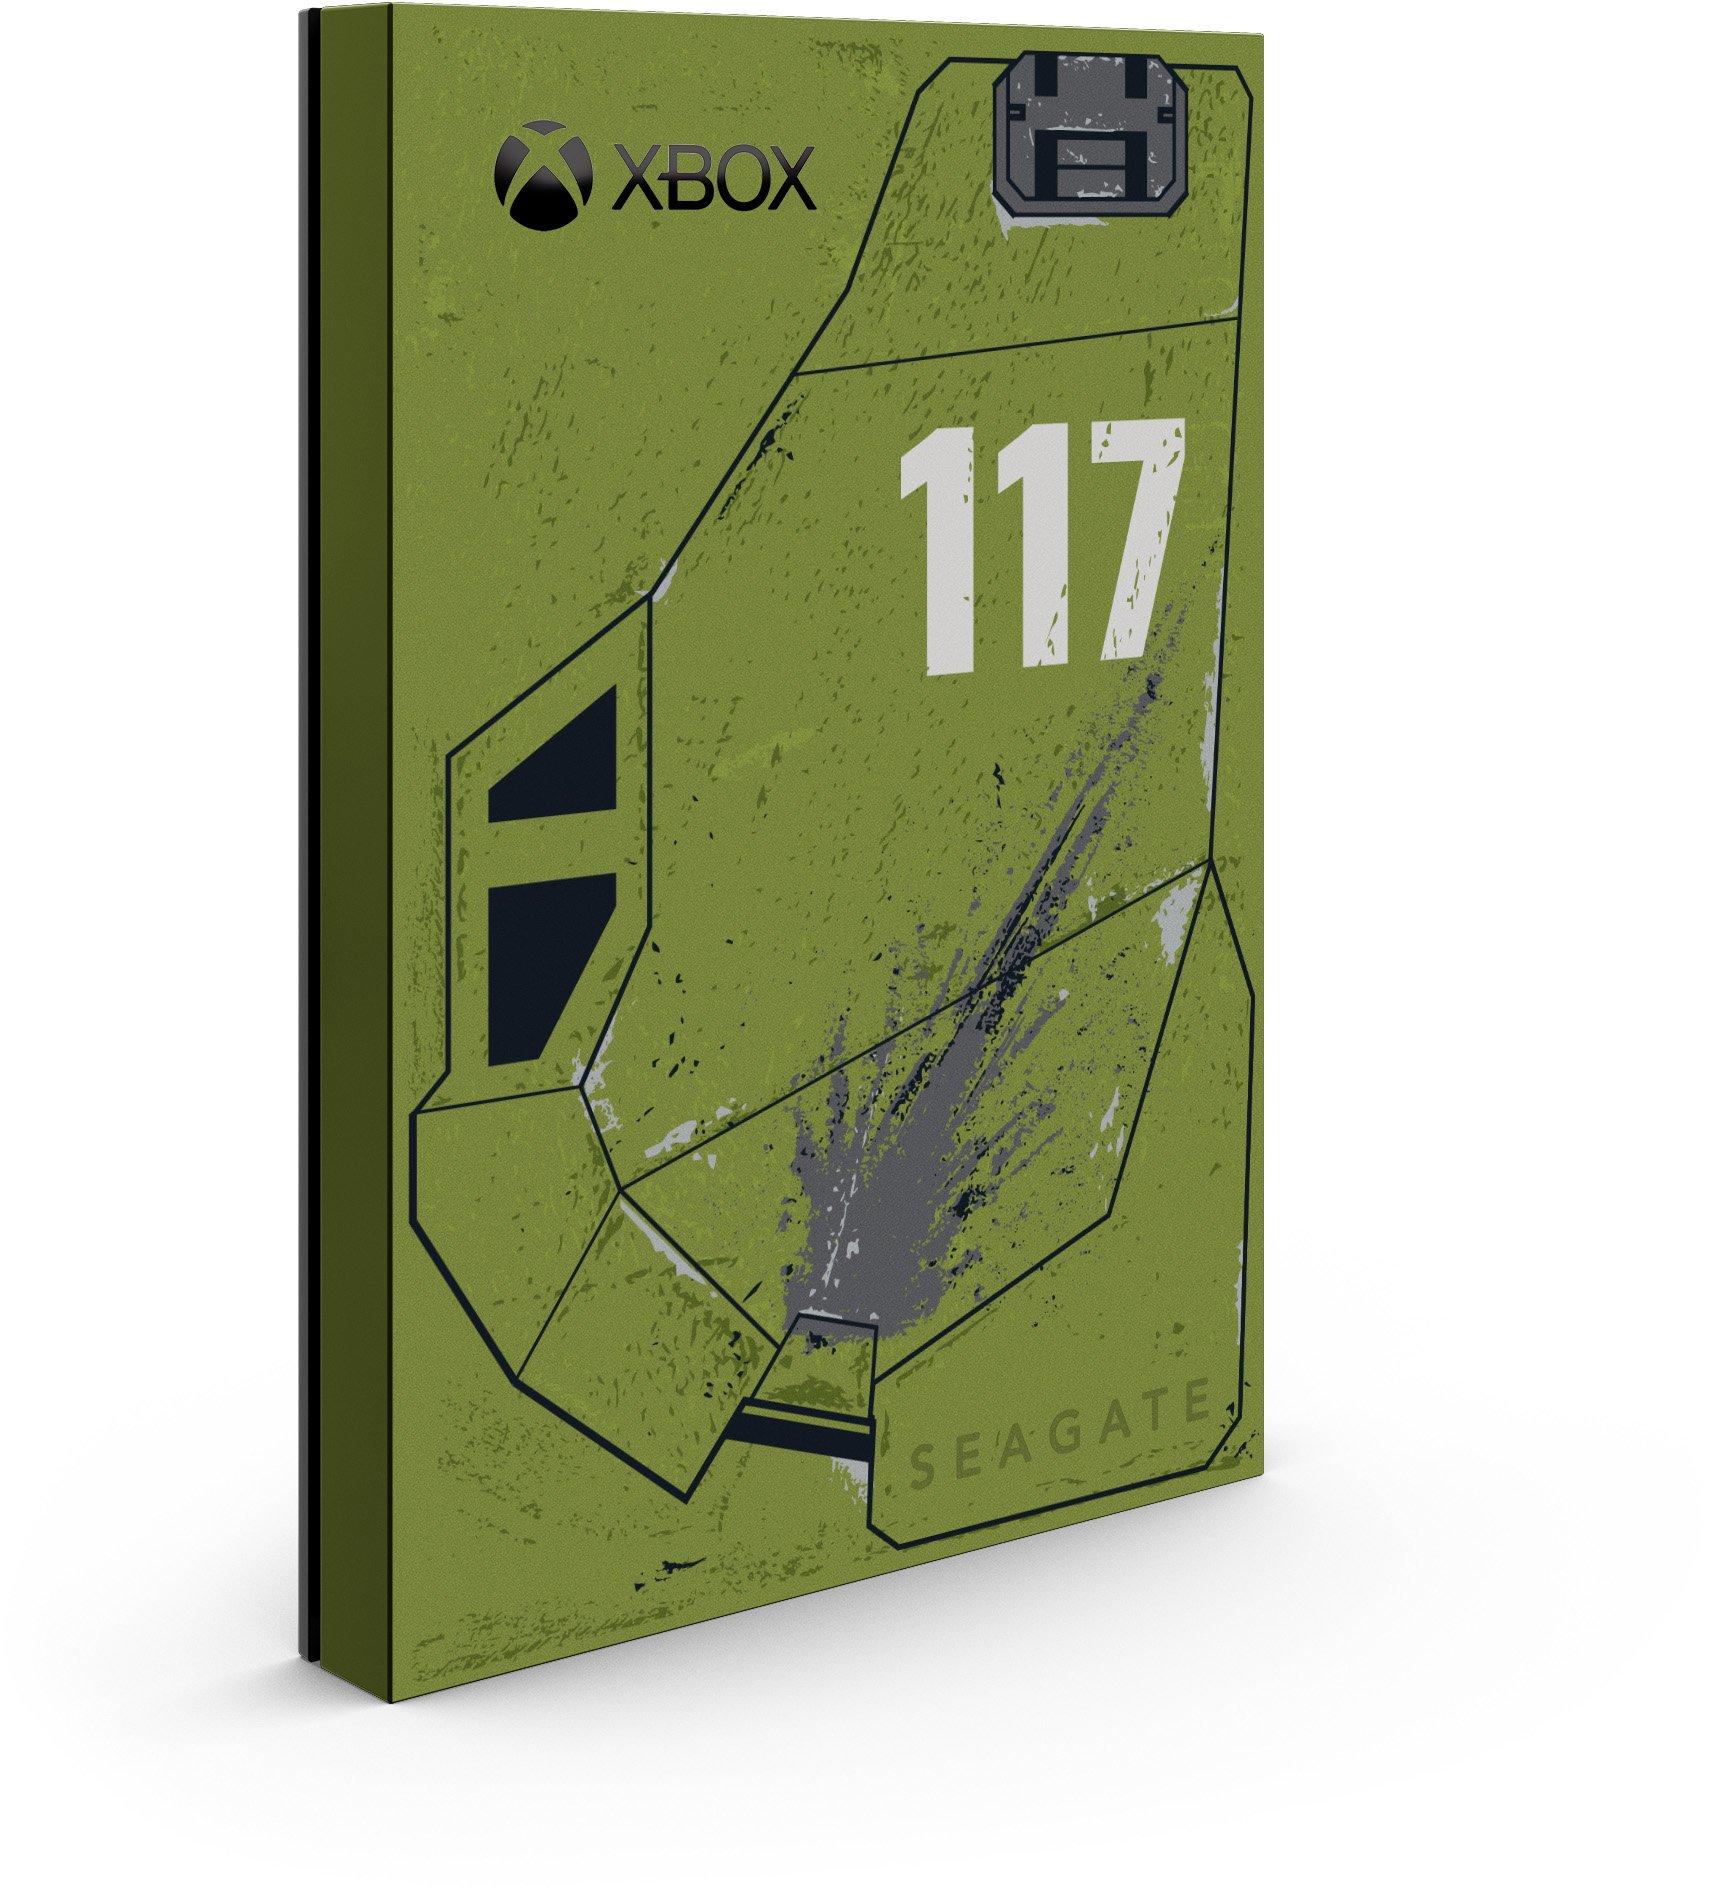 list item 2 of 3 Seagate 2TB Game Drive for Xbox - Halo Infinite Special Edition